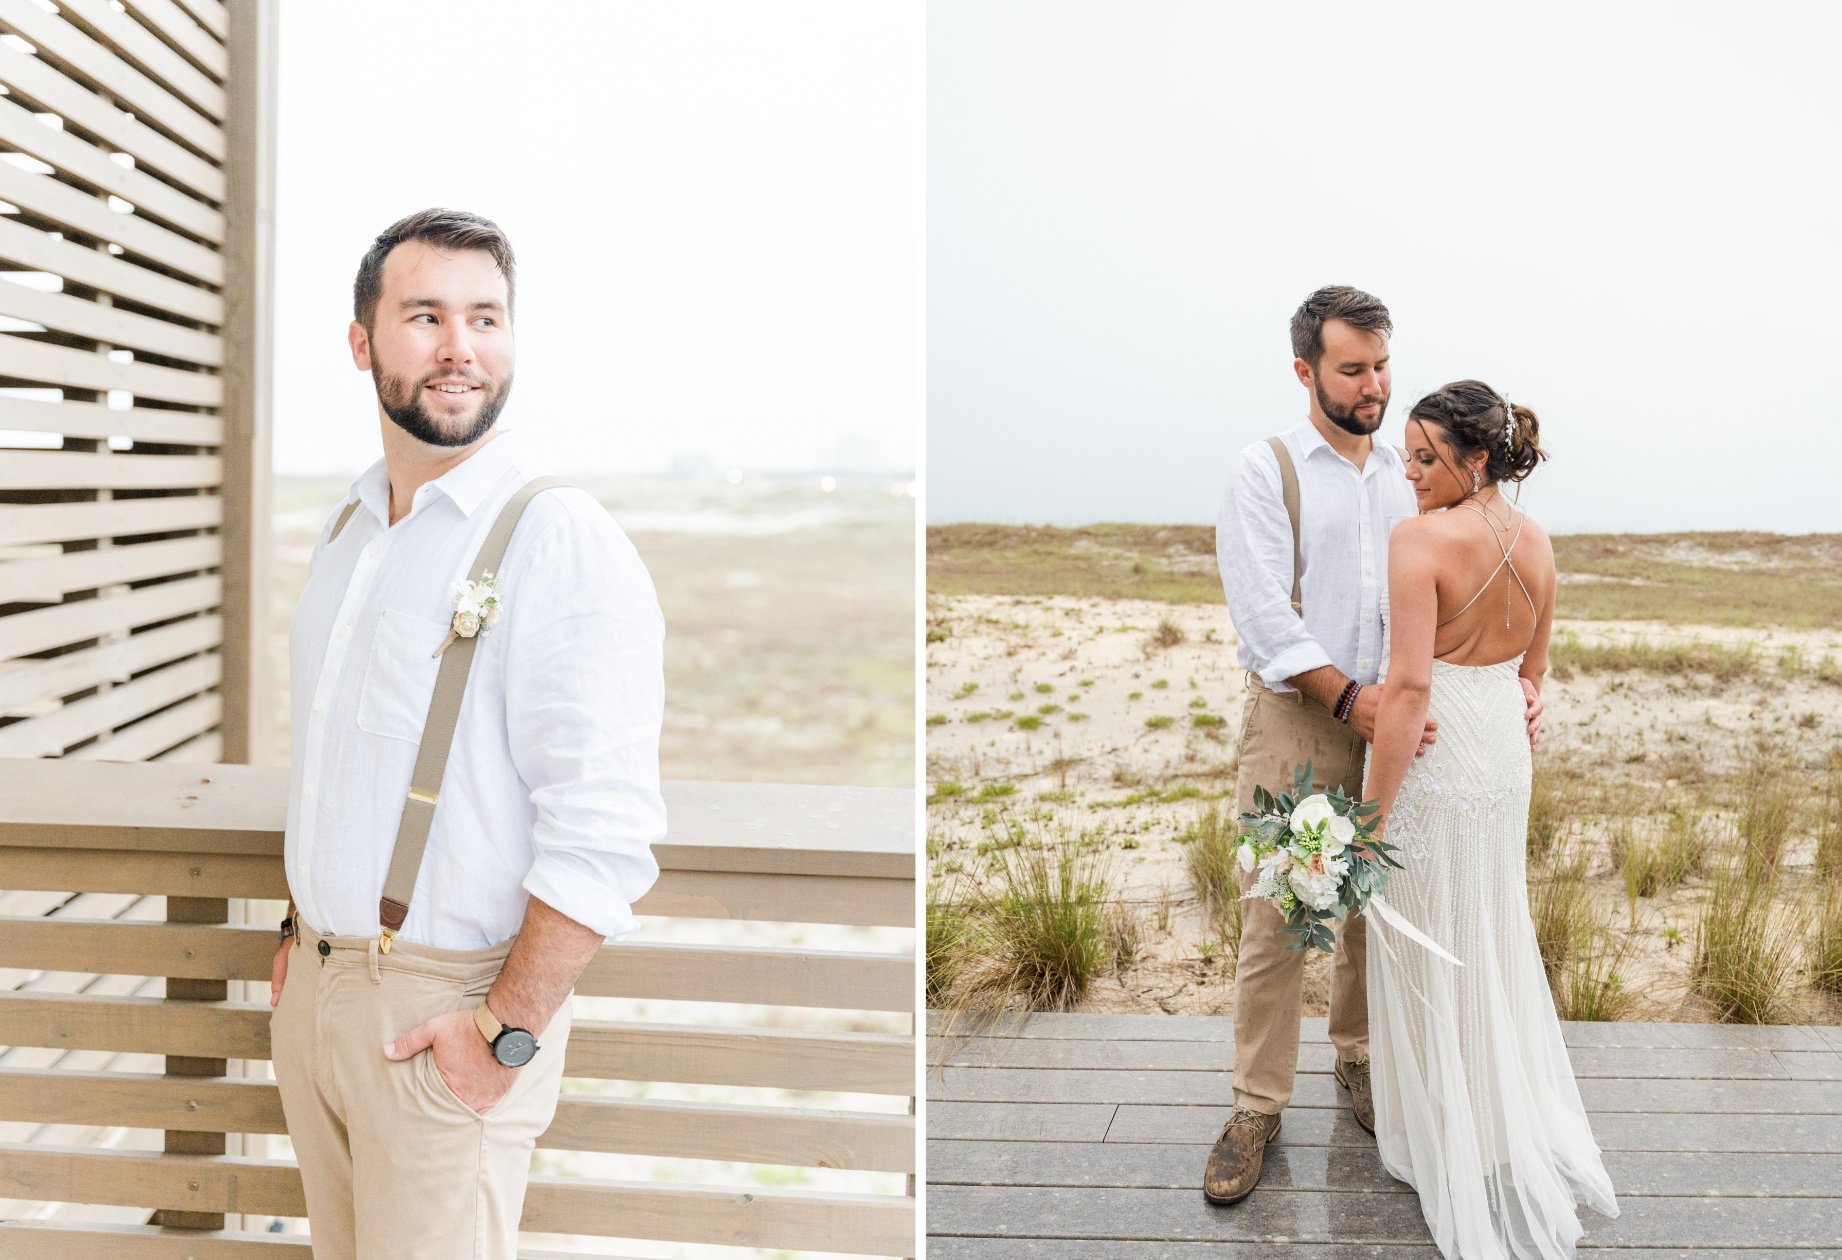 Rainy Gulf Shores Wedding Elopement Bride and Groom Portraits Photographed by Kristen Marcus Photography | Alabama Wedding Photographer